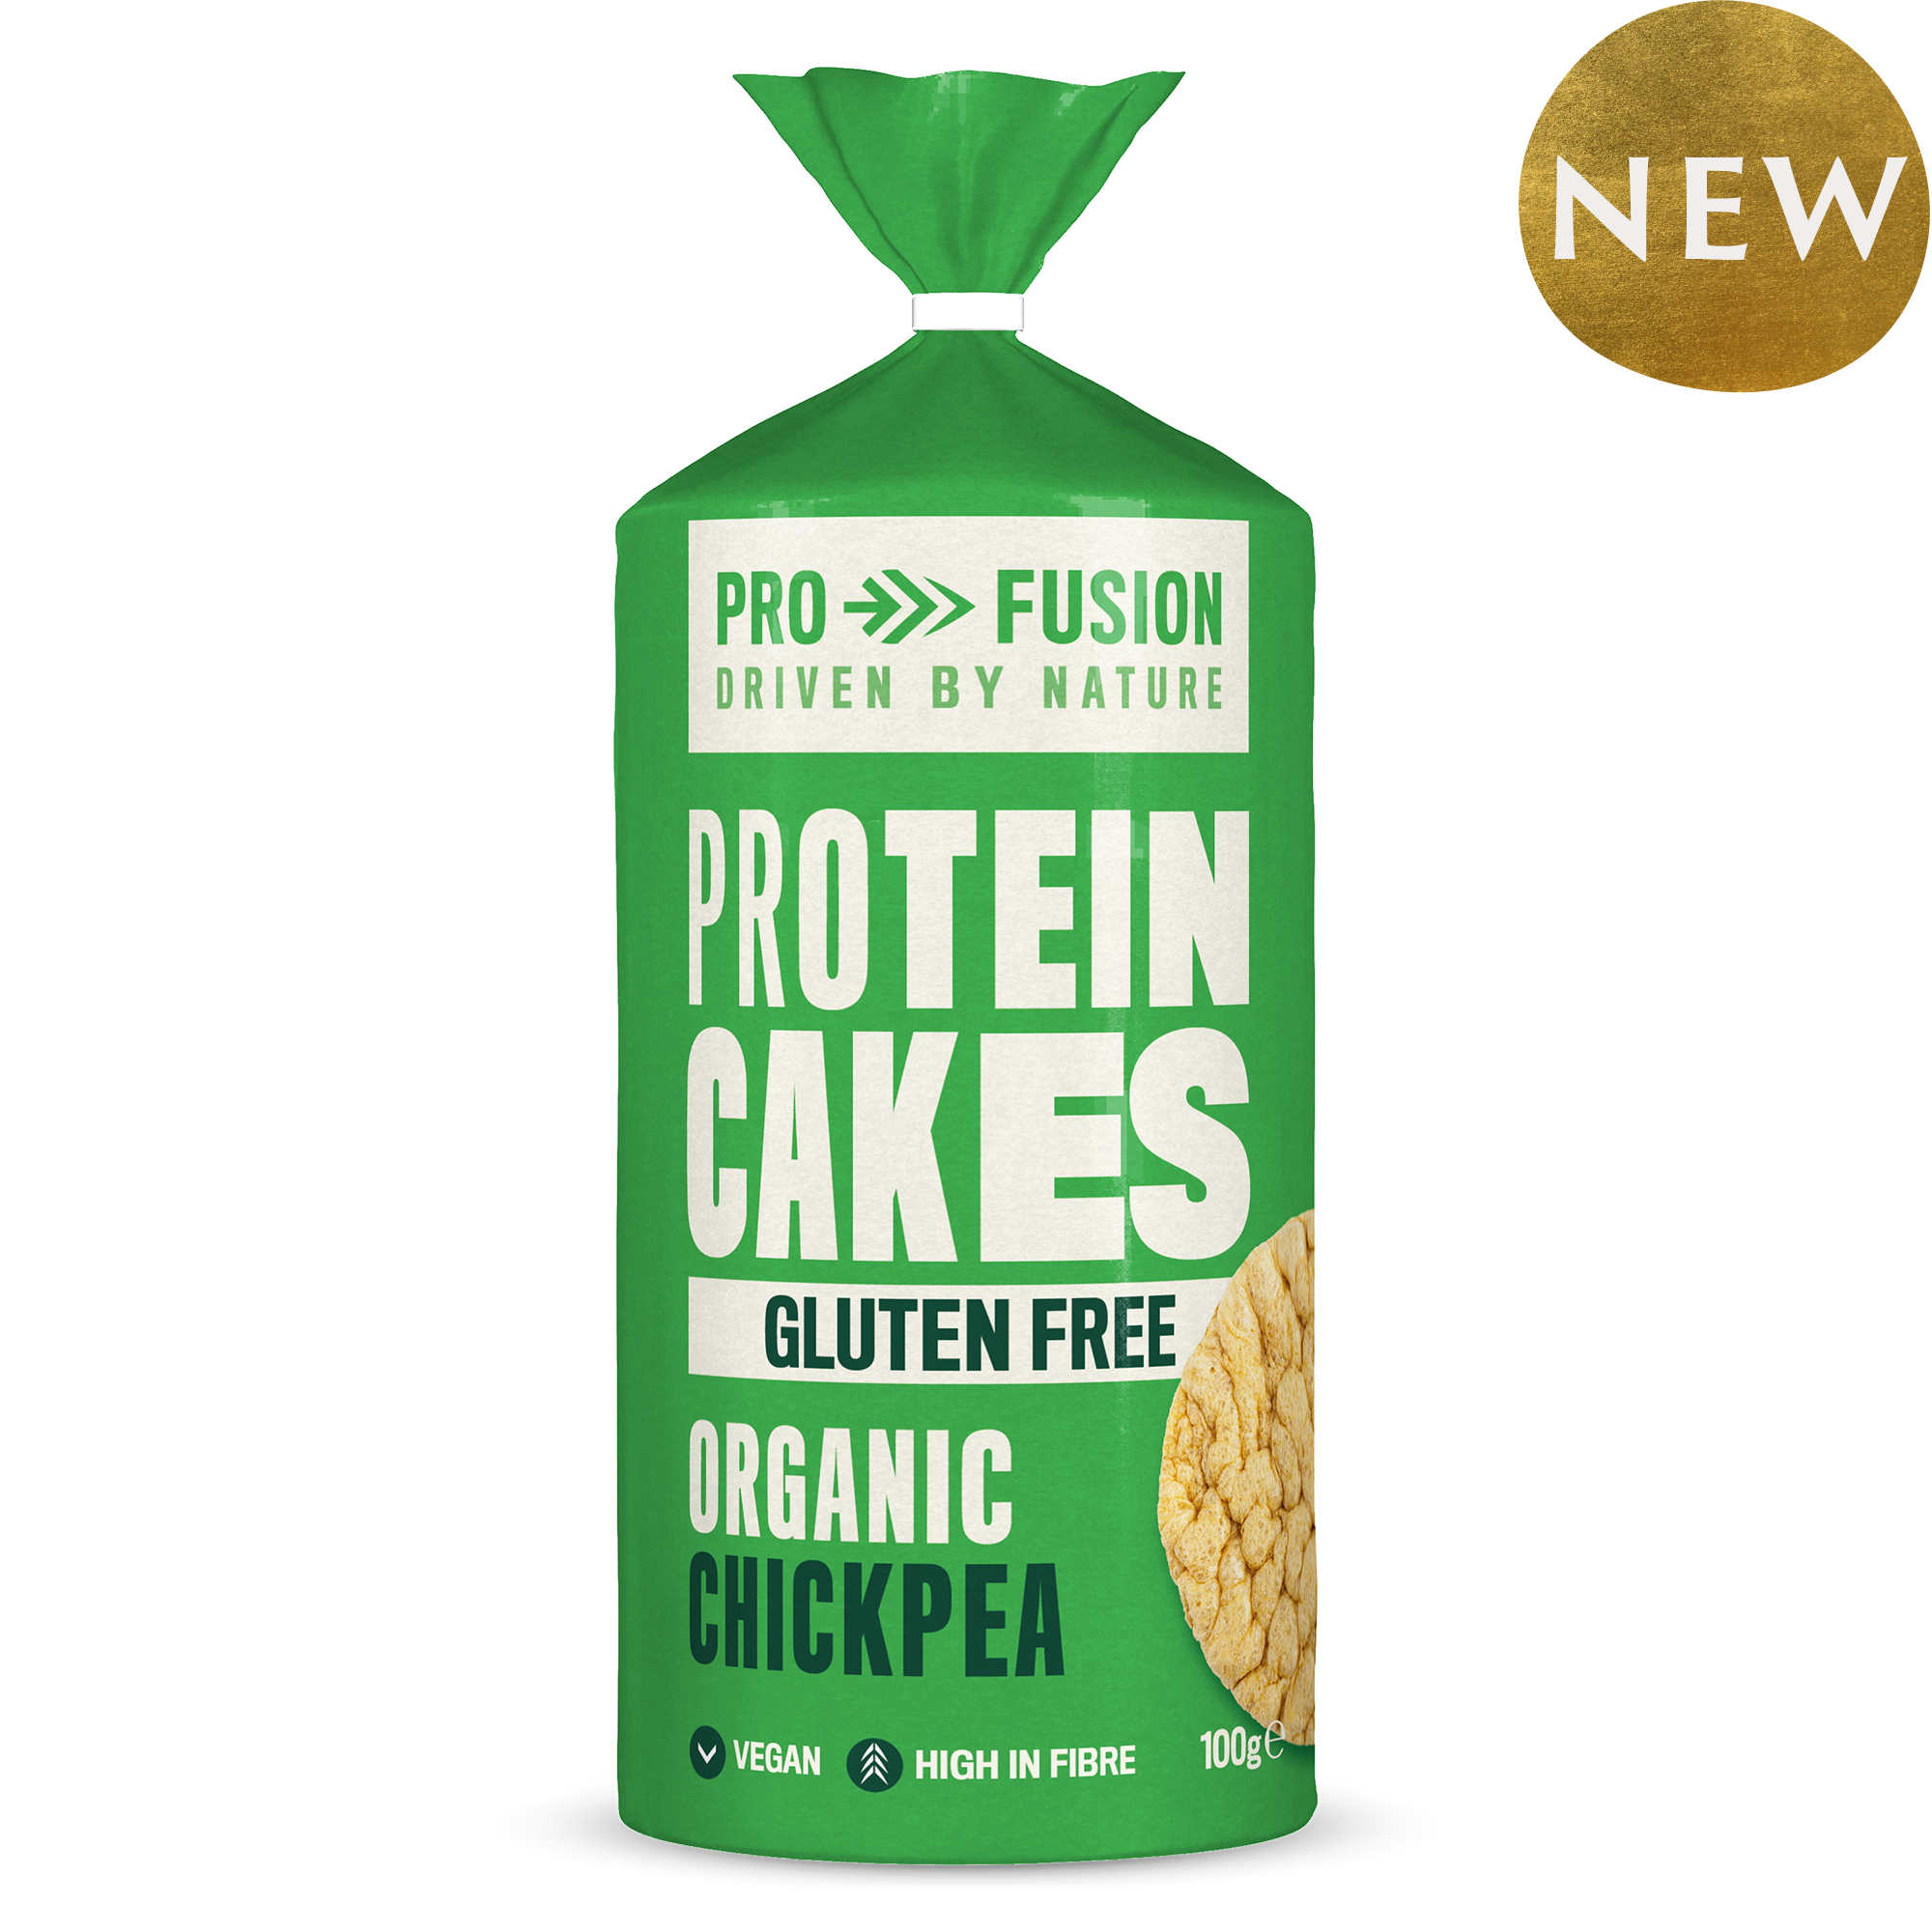 PROTEIN CHICKPEA CAKES ORGANIC